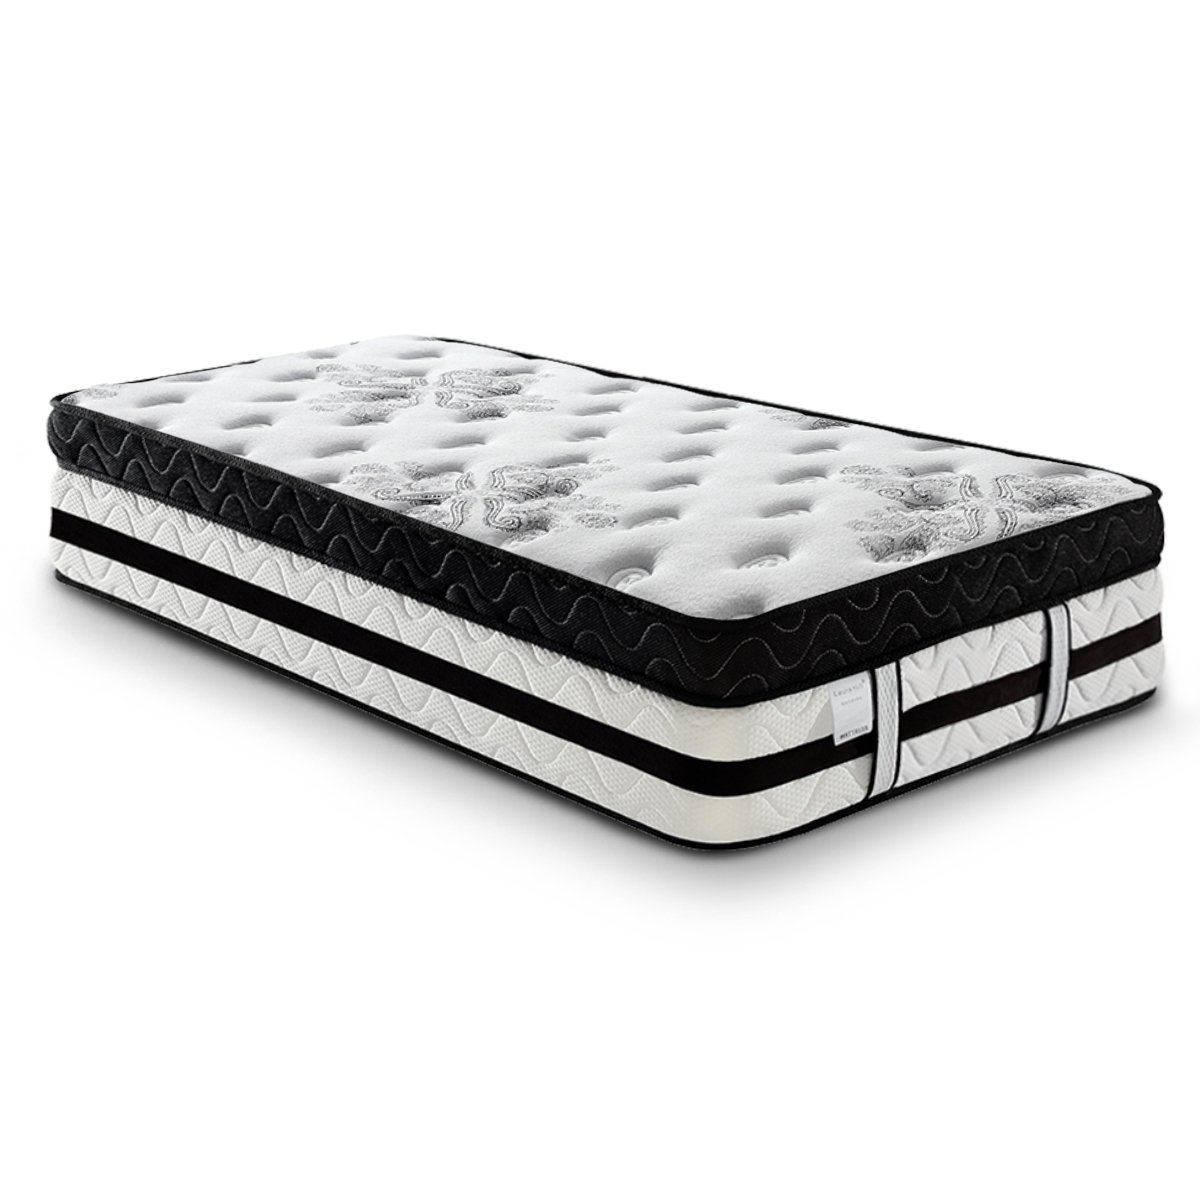 Laura Hill Single Mattress with Euro Top - 34cm 1